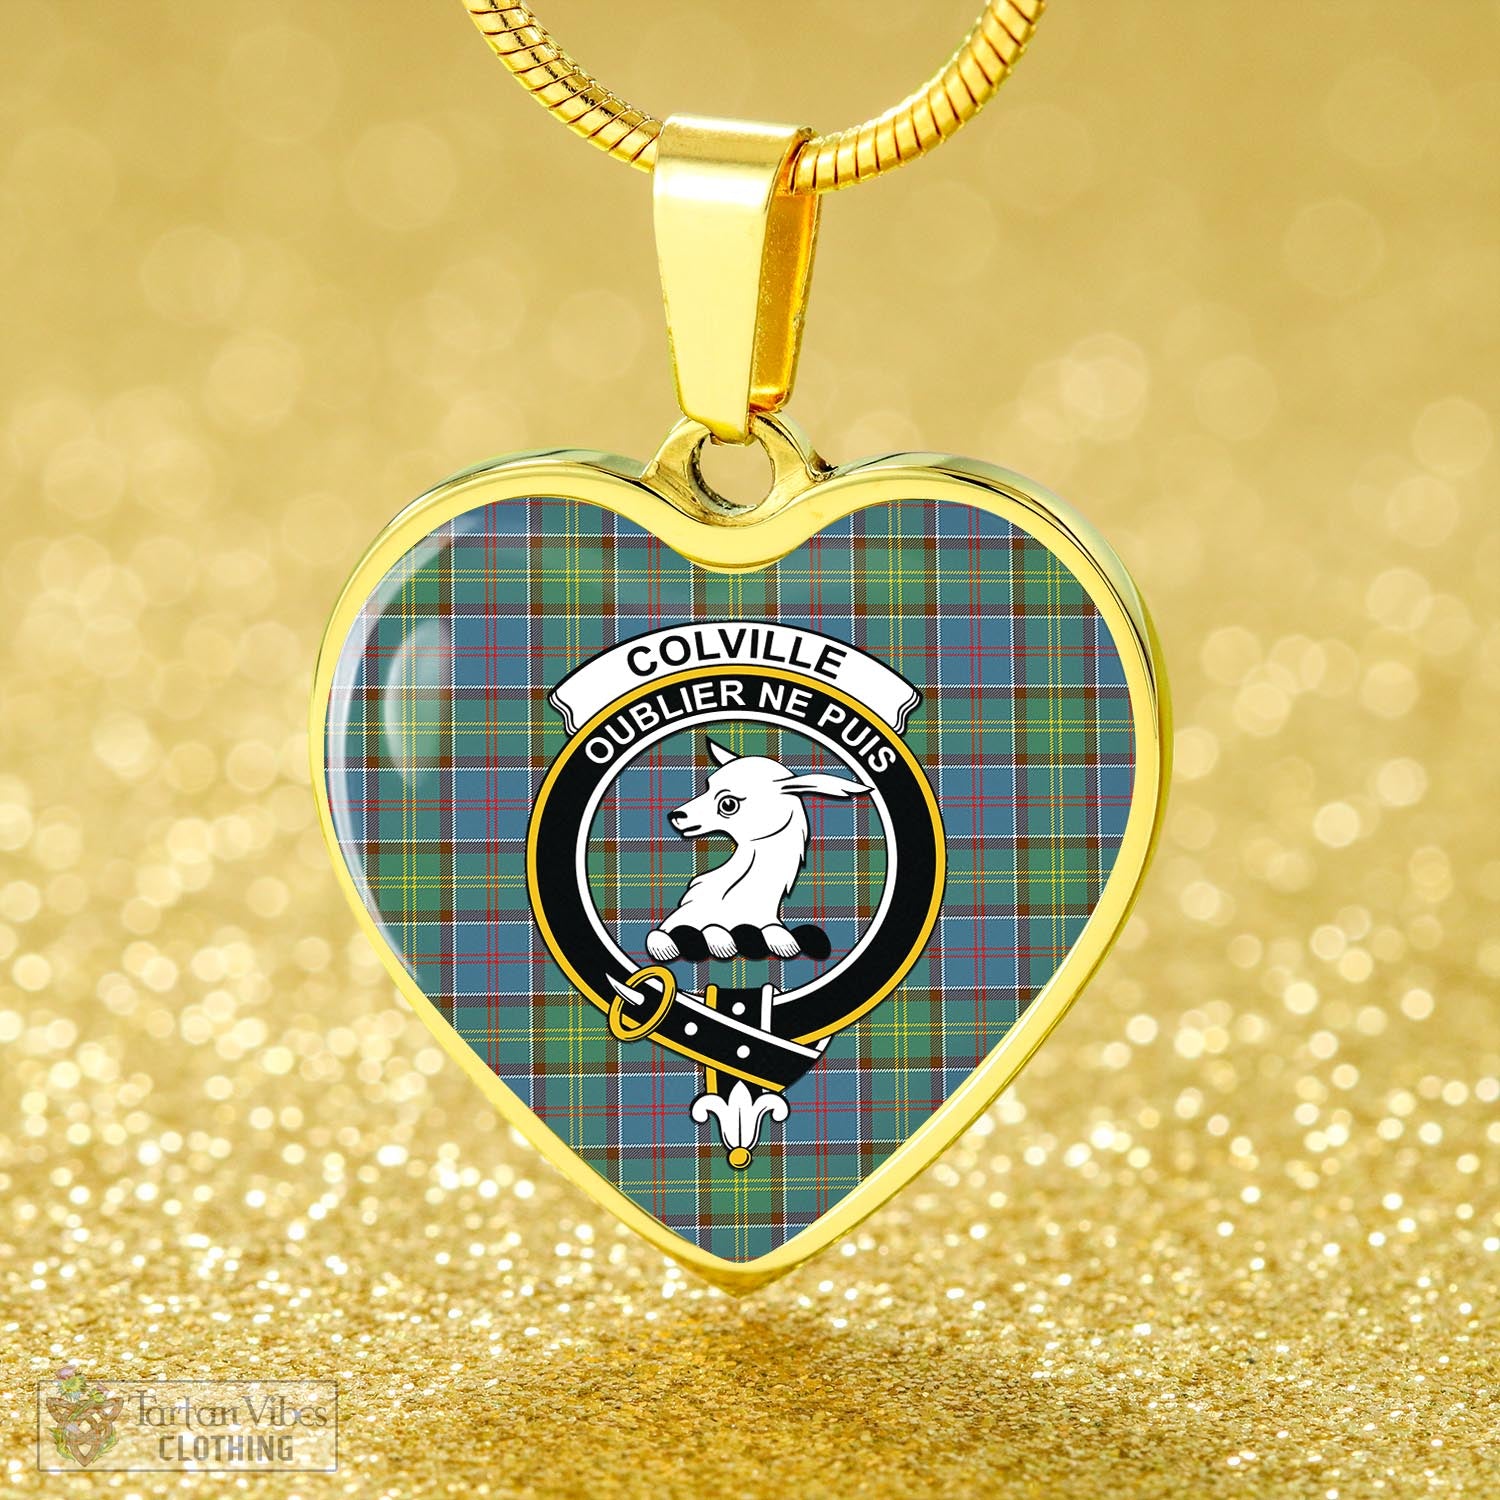 Tartan Vibes Clothing Colville Tartan Heart Necklace with Family Crest